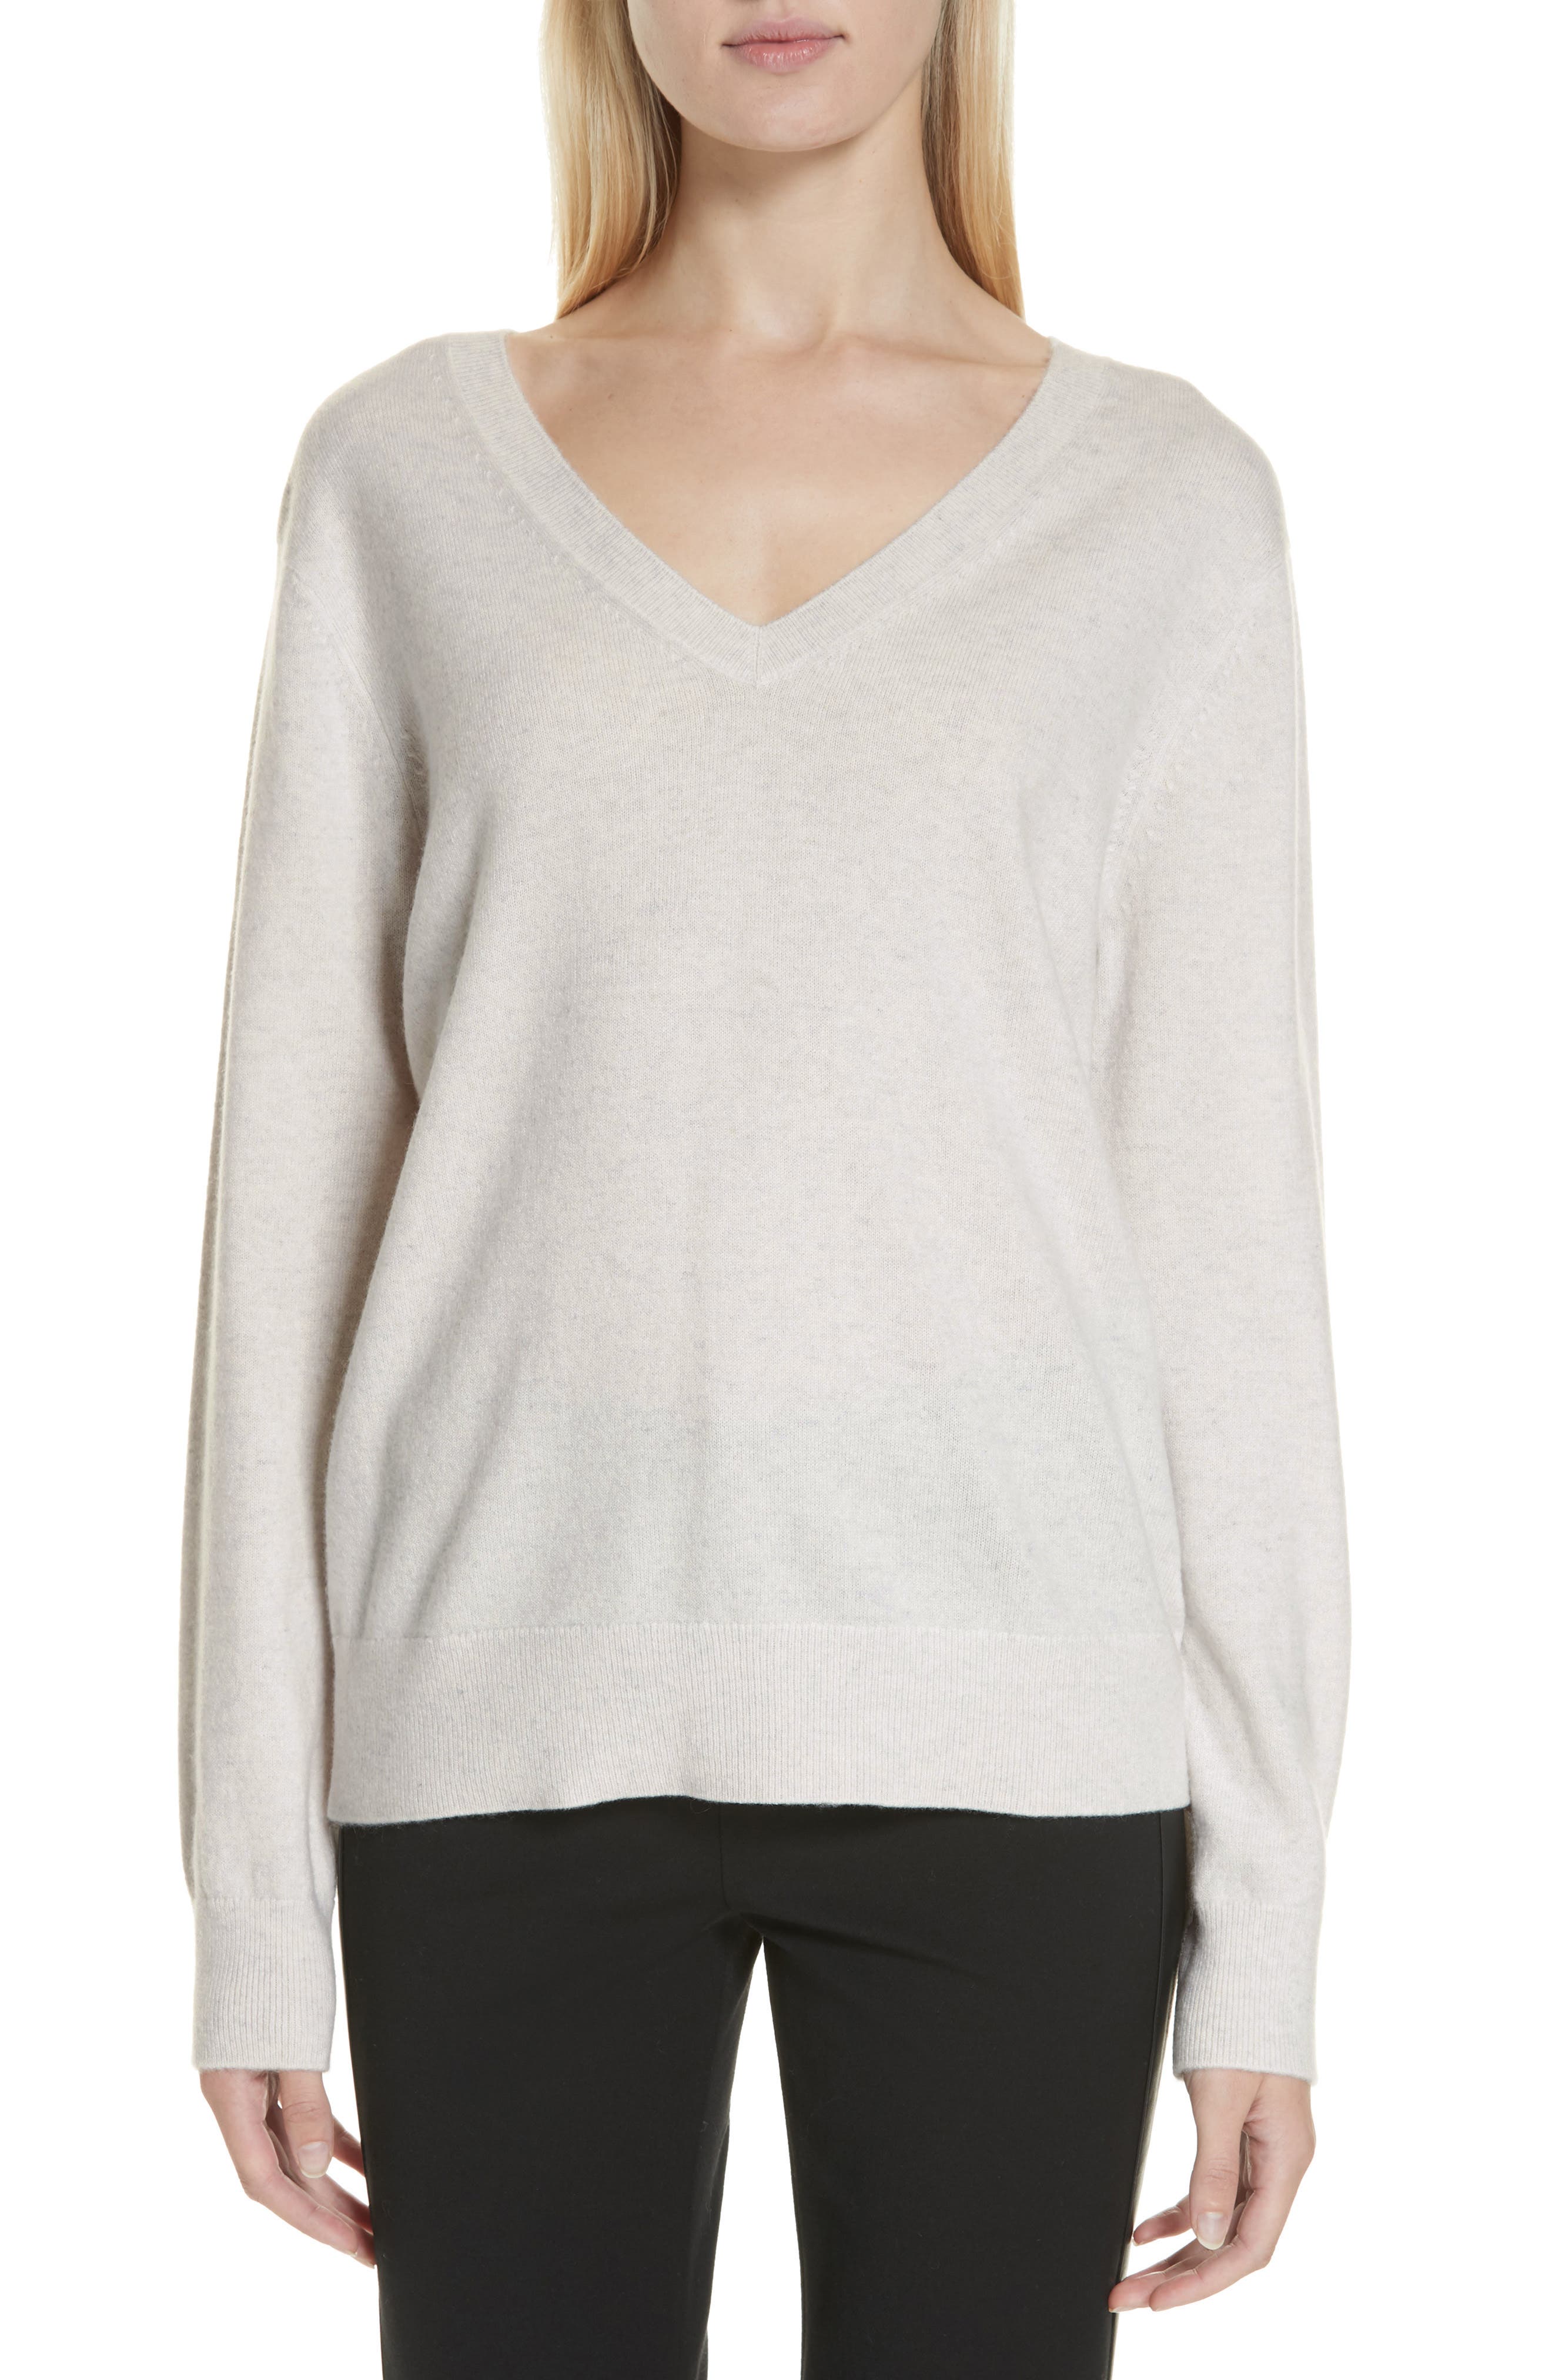 Vince Weekend V-Neck Cashmere Sweater in Heather White